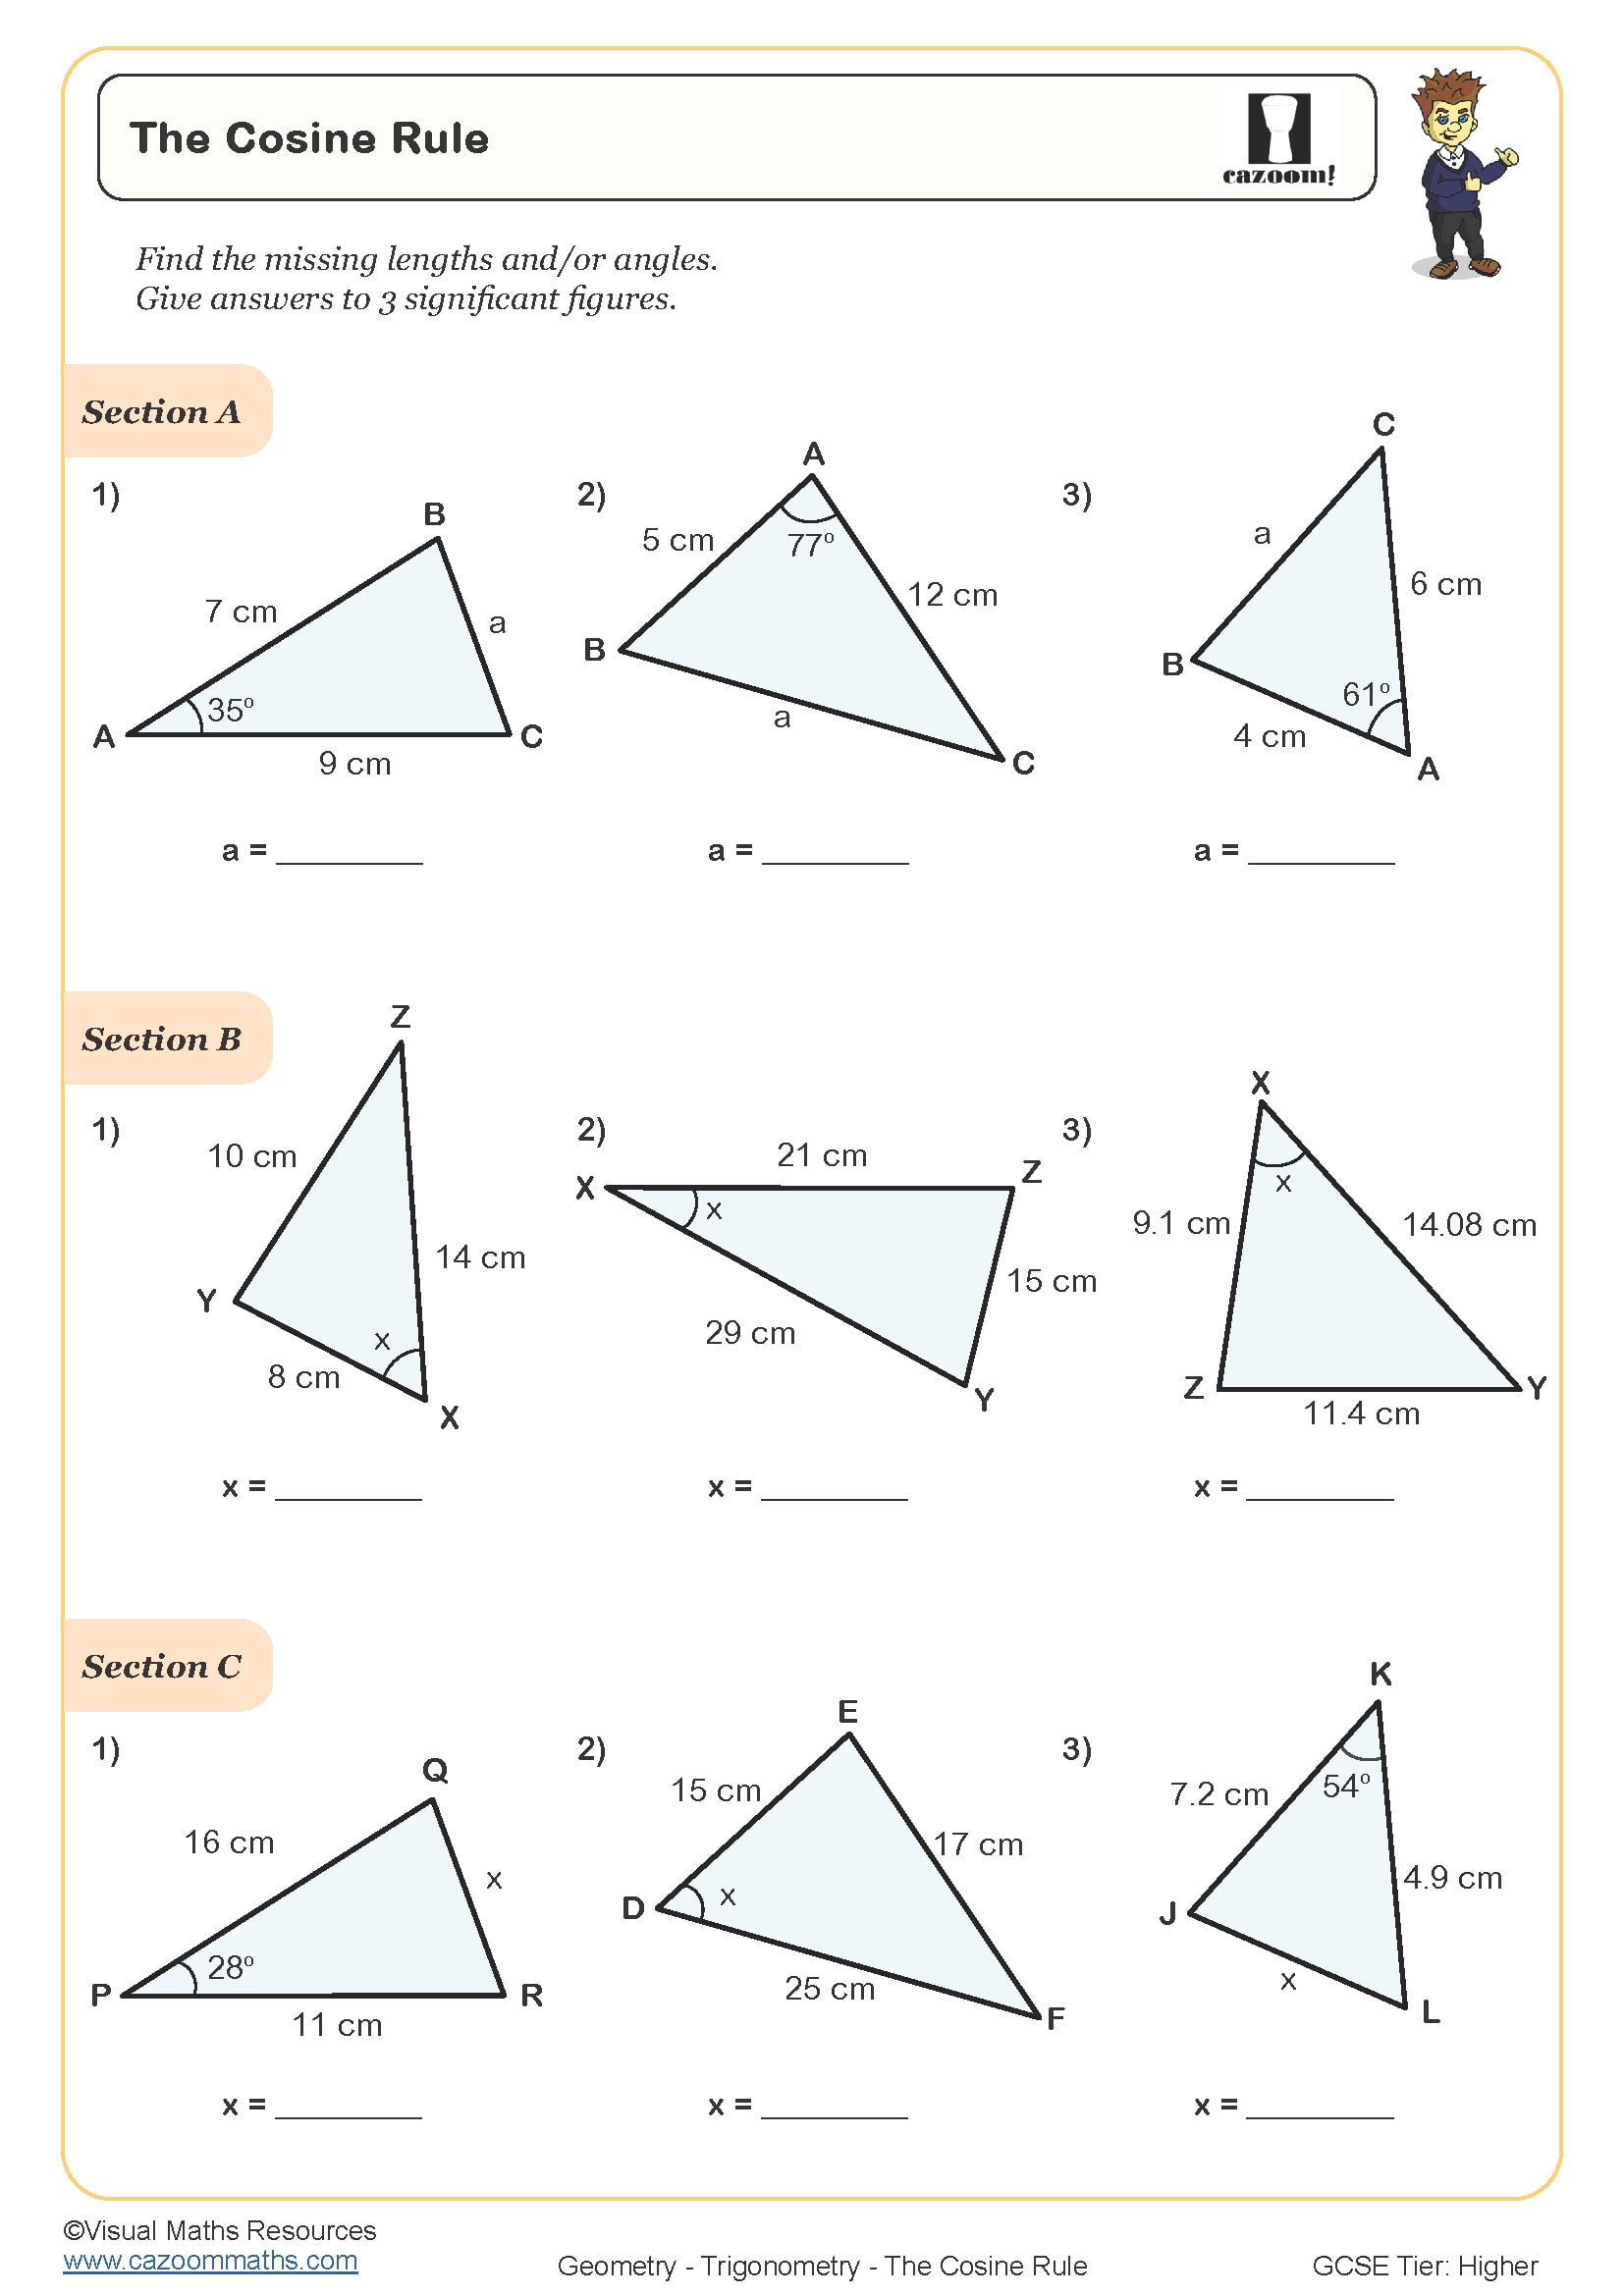 The Cosine Rule Worksheet perfect for students in year 7 and year 8